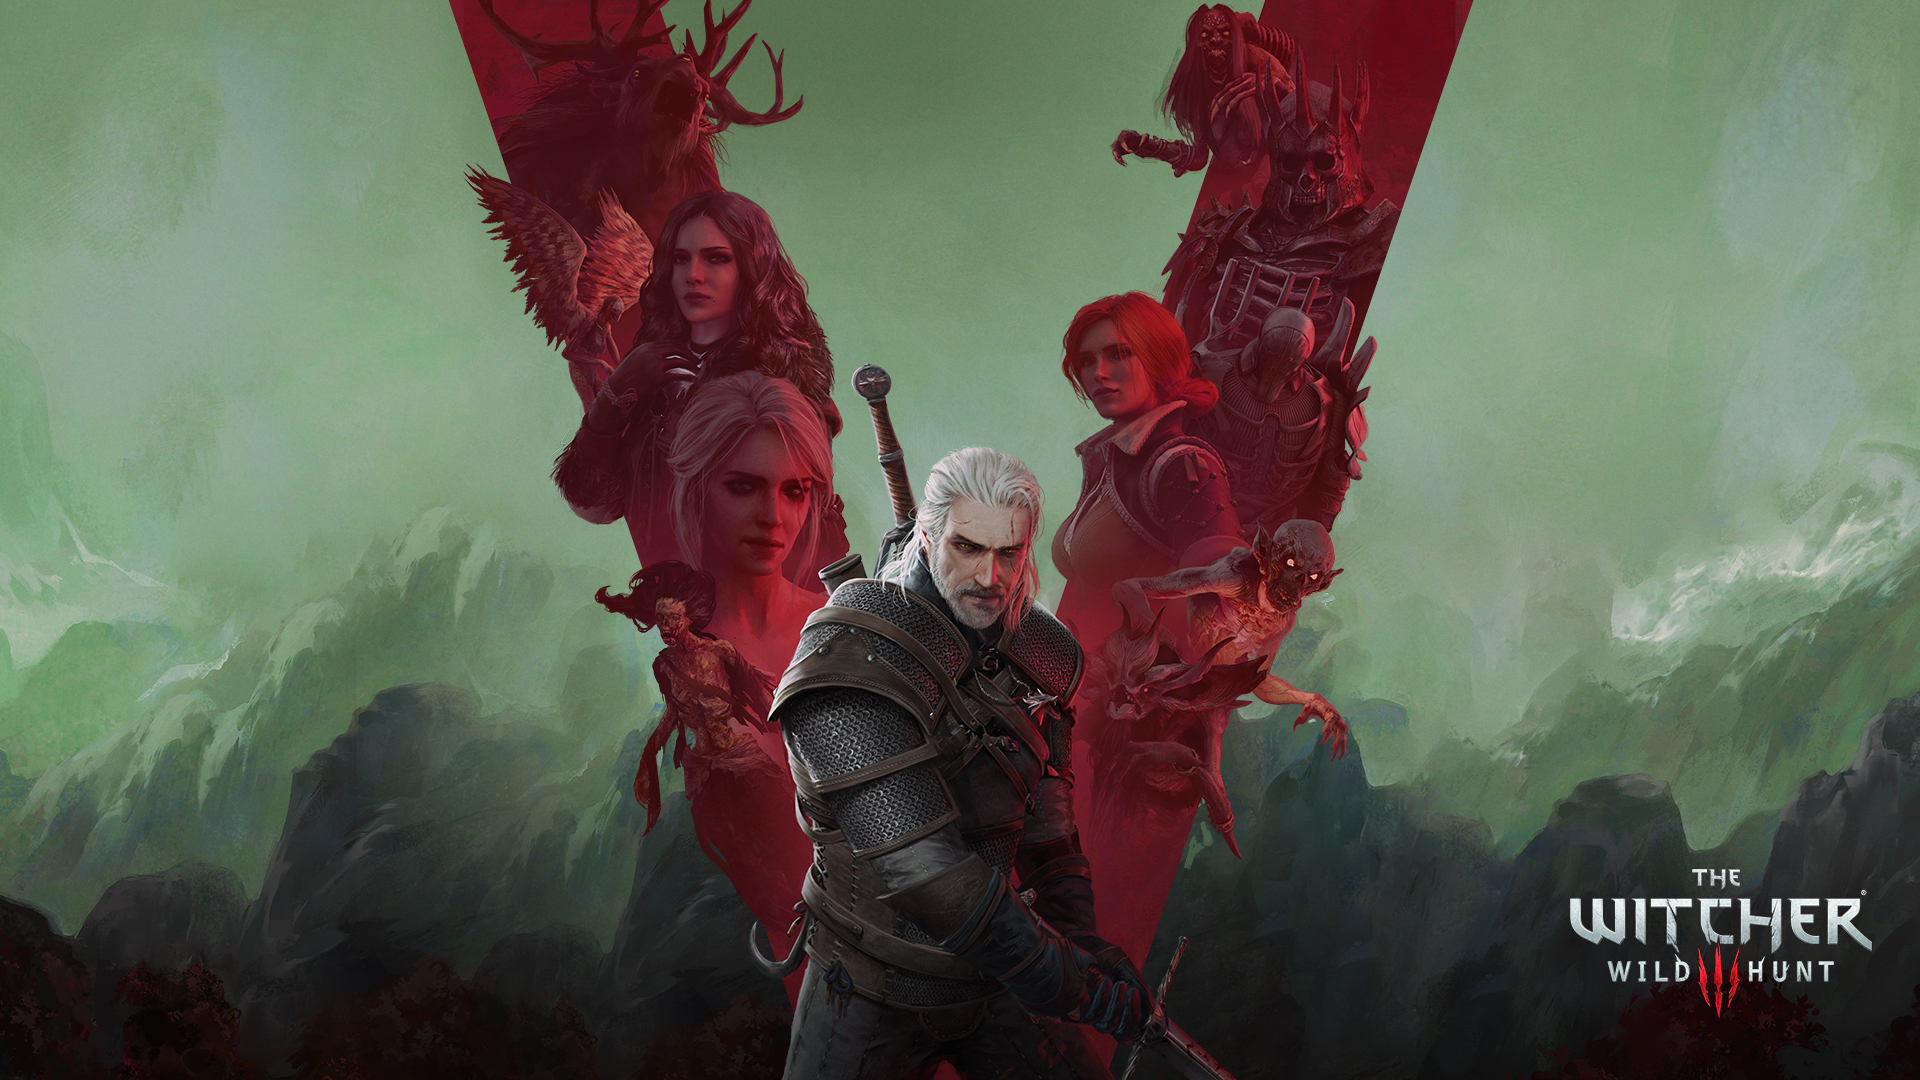 The Witcher 3 Wild Hunt Official Website